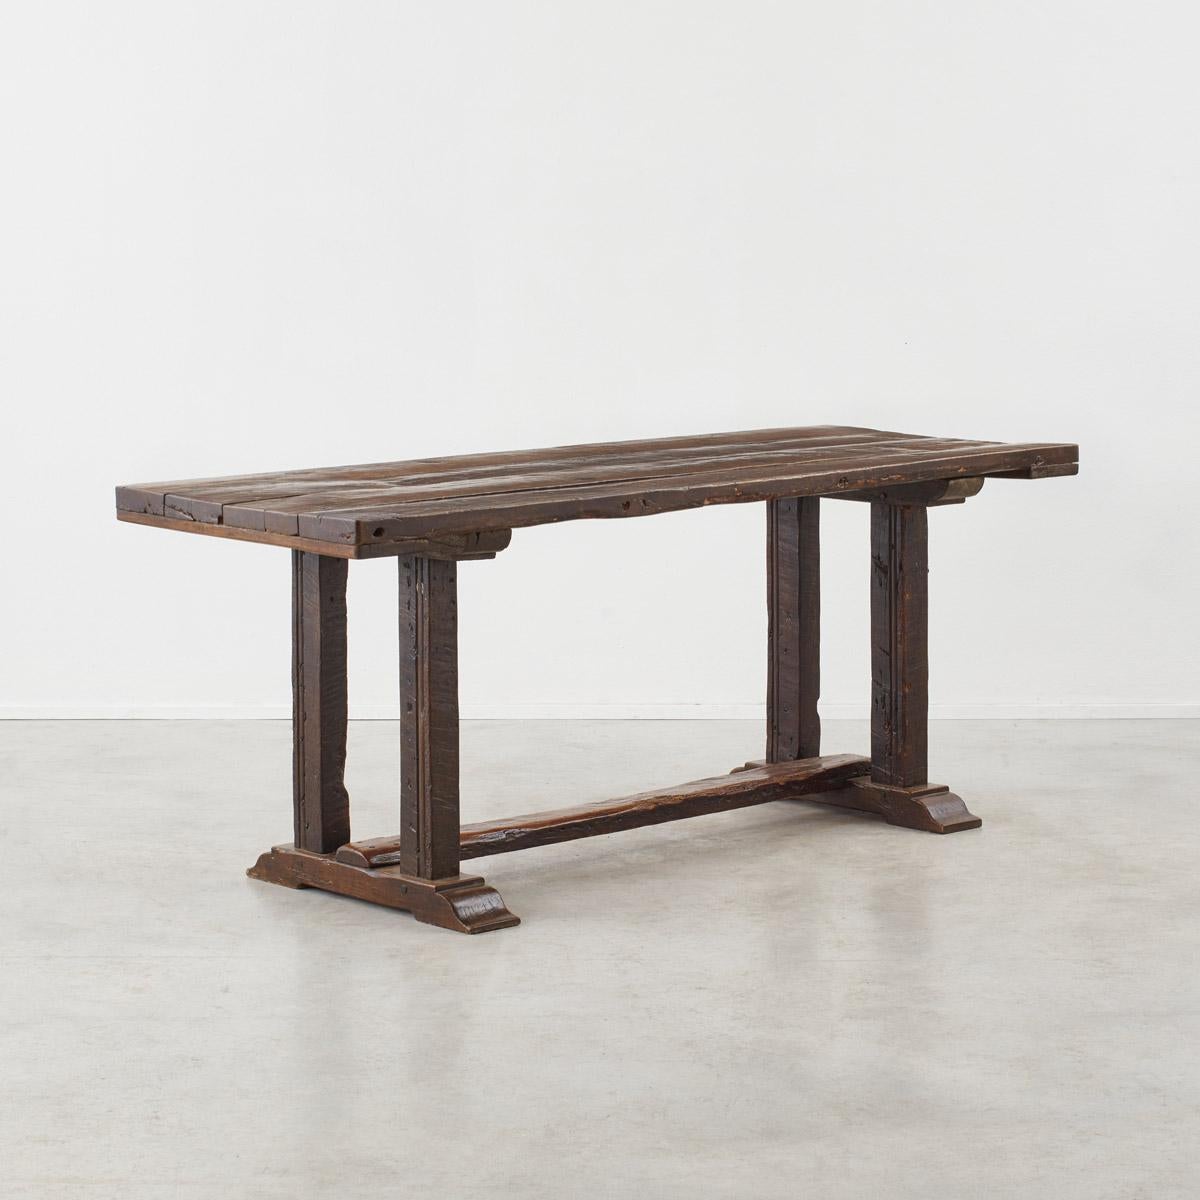 A rustic refectory table with a lovely deeply patinaed stained and wax finish. The table shows all the desirable hallmarks of age for one of its type – open wood grain, splits, dents and bags of patination to its top. It looks like it has possibly